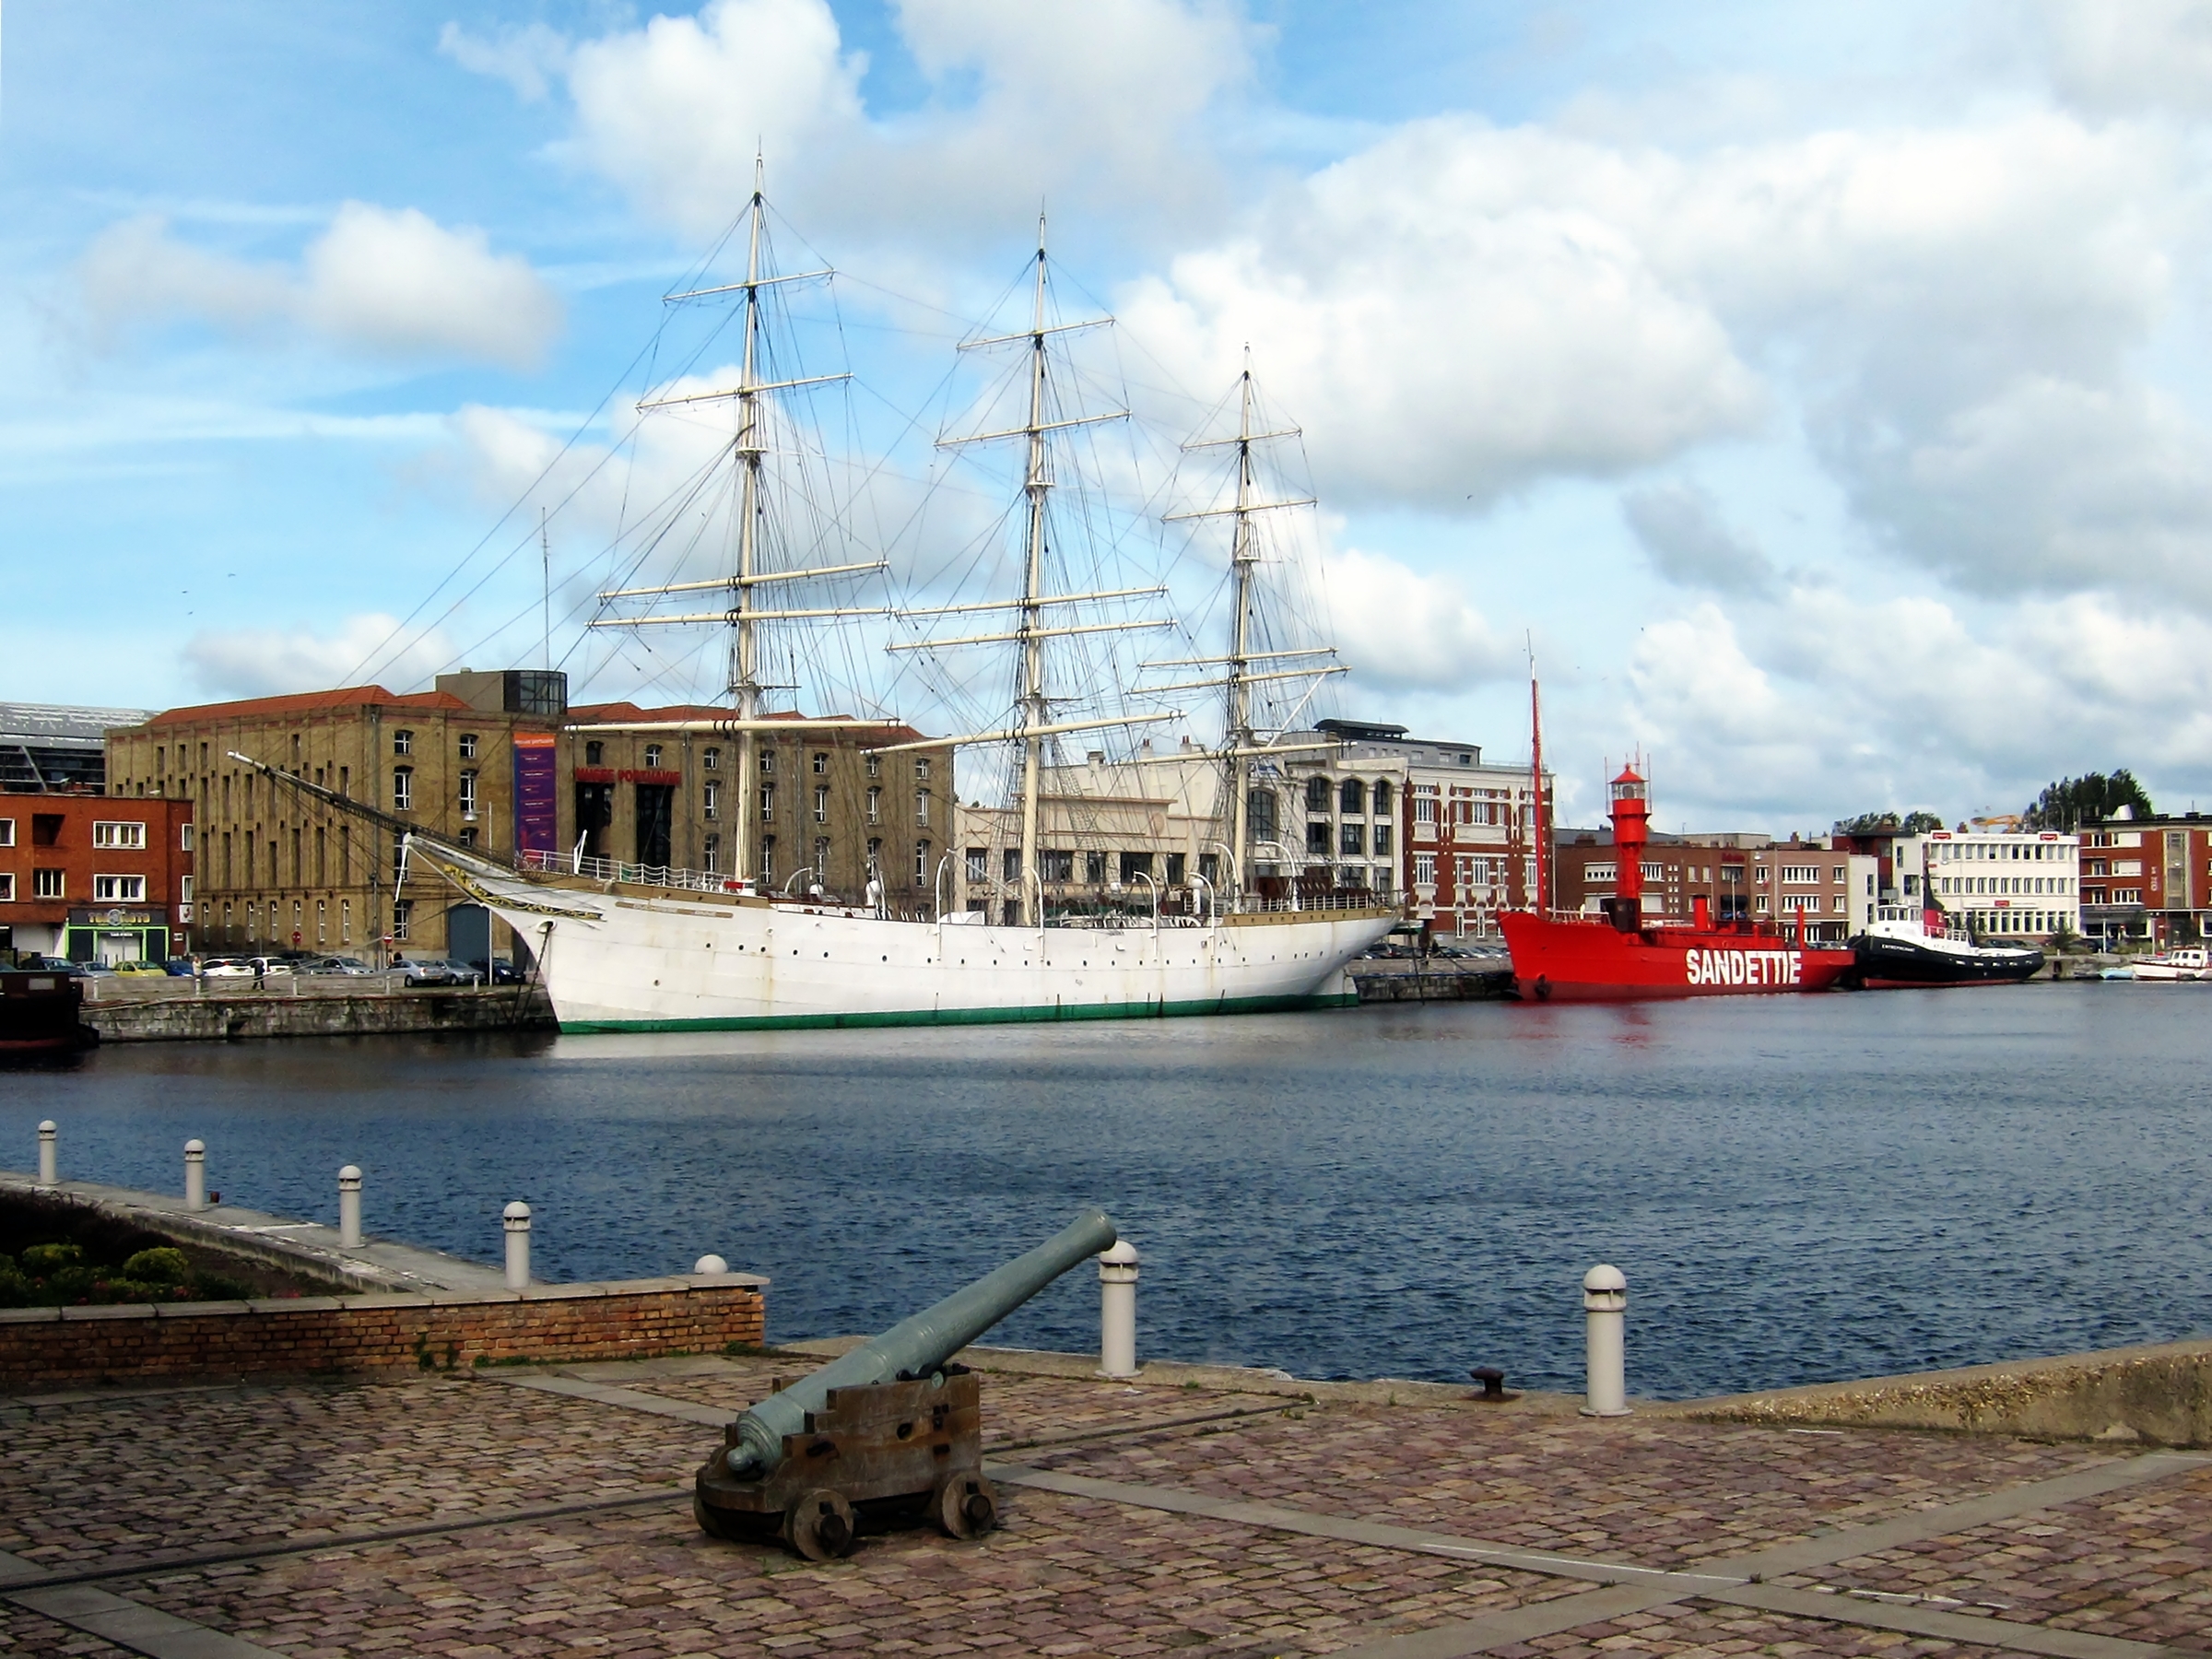 435-dunkerque_musee_portuaire.jpg